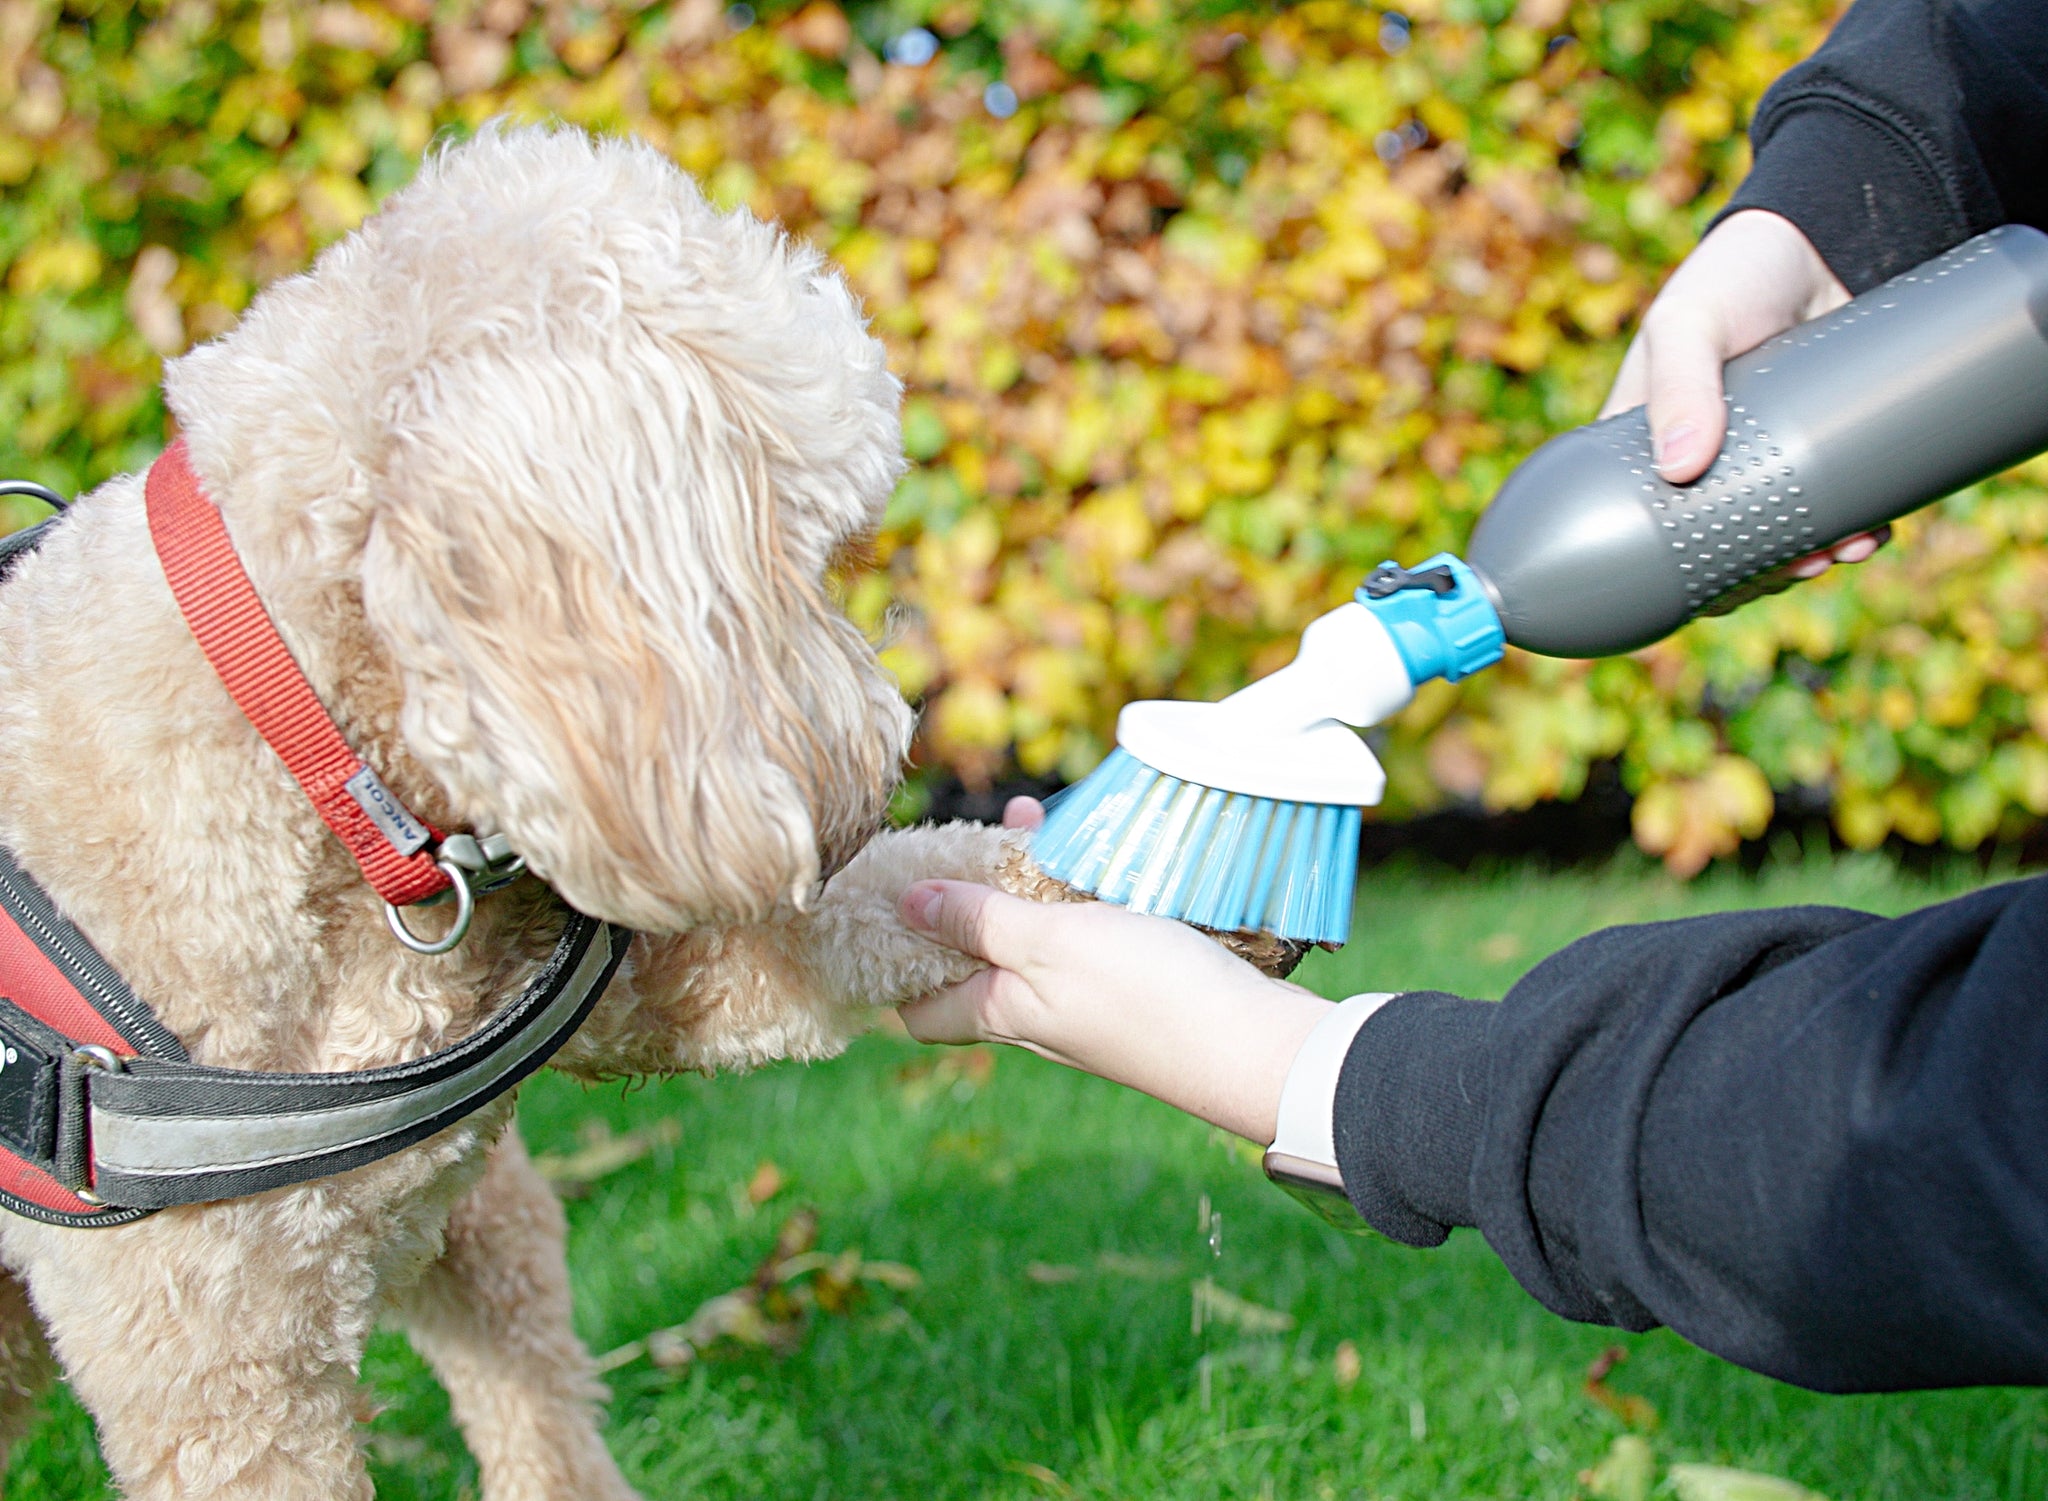 Paw Mate - Quickly Wash & Clean Your Pet Paws & Fur - Also Ideal for Muddy Boots & Footwear – 500ml Bottle - Also Connects to Garden Hose – Pet & Dog Paw Cleaner Washer & Thoughtful Dog Walker Gift